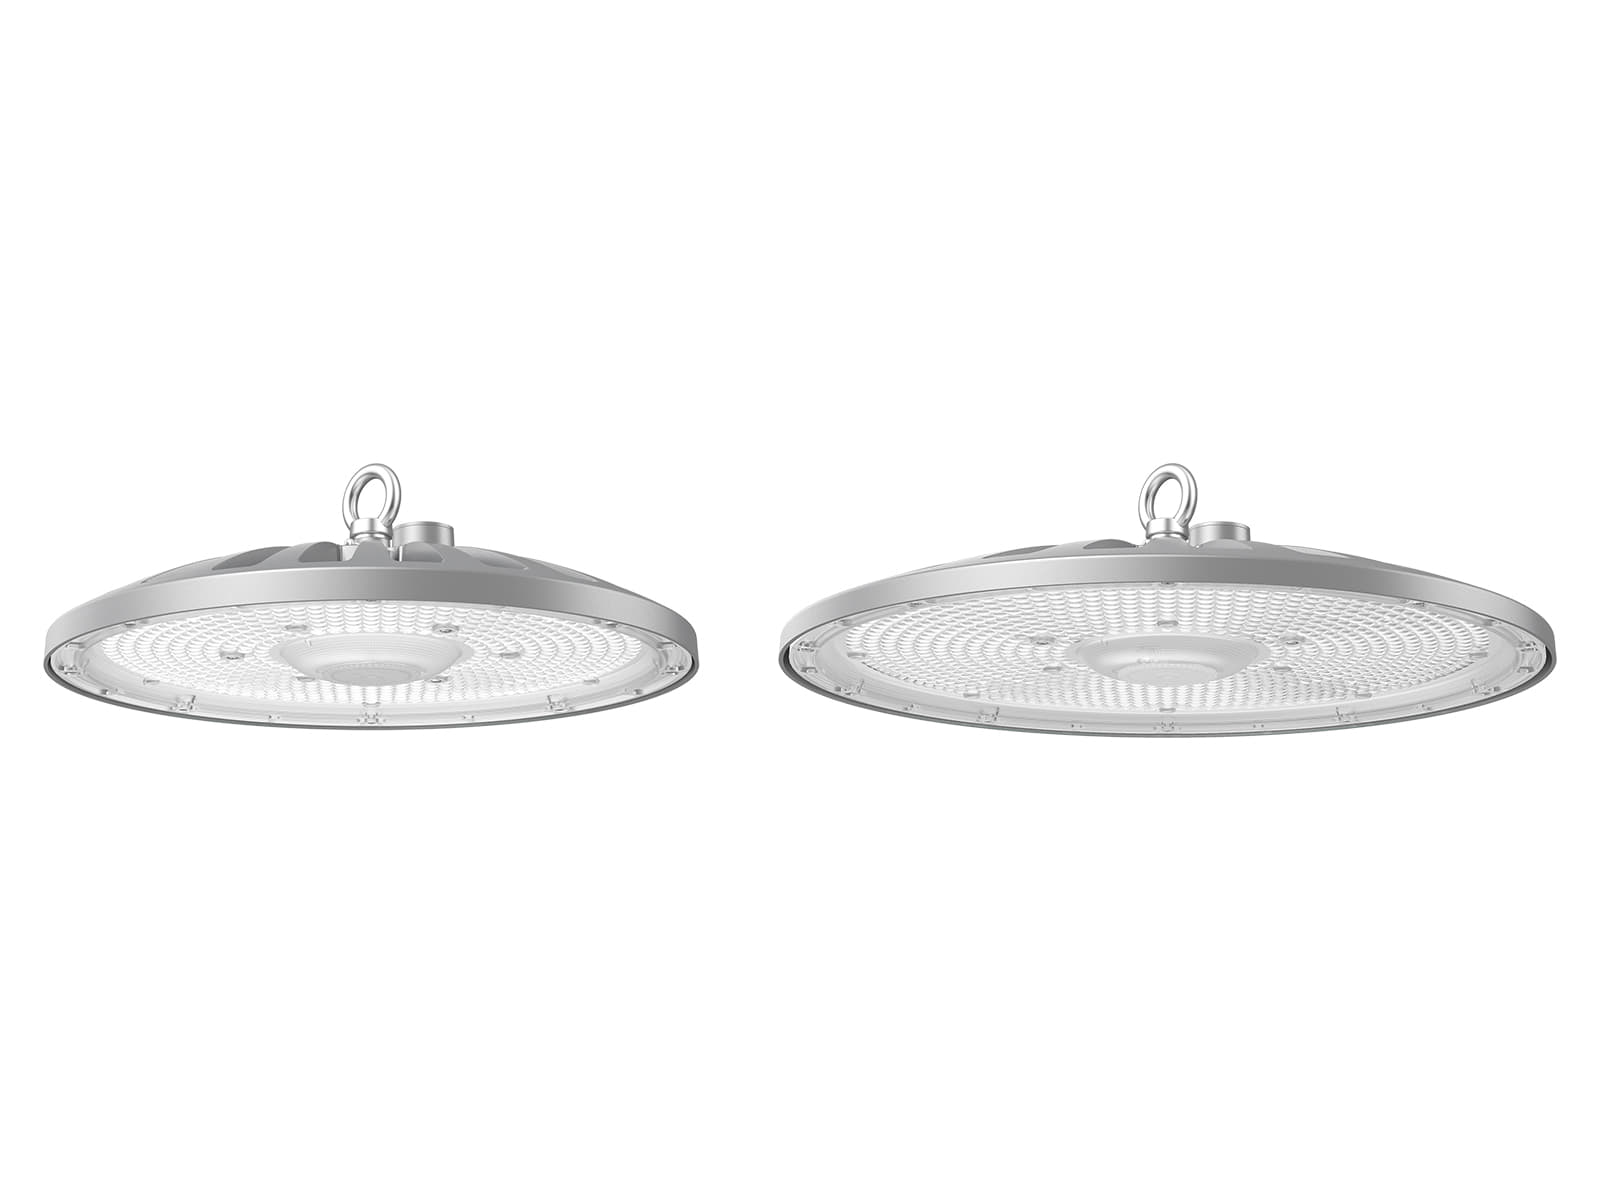 HB67 Low UGR LED High Bay with Twist central intelligent control